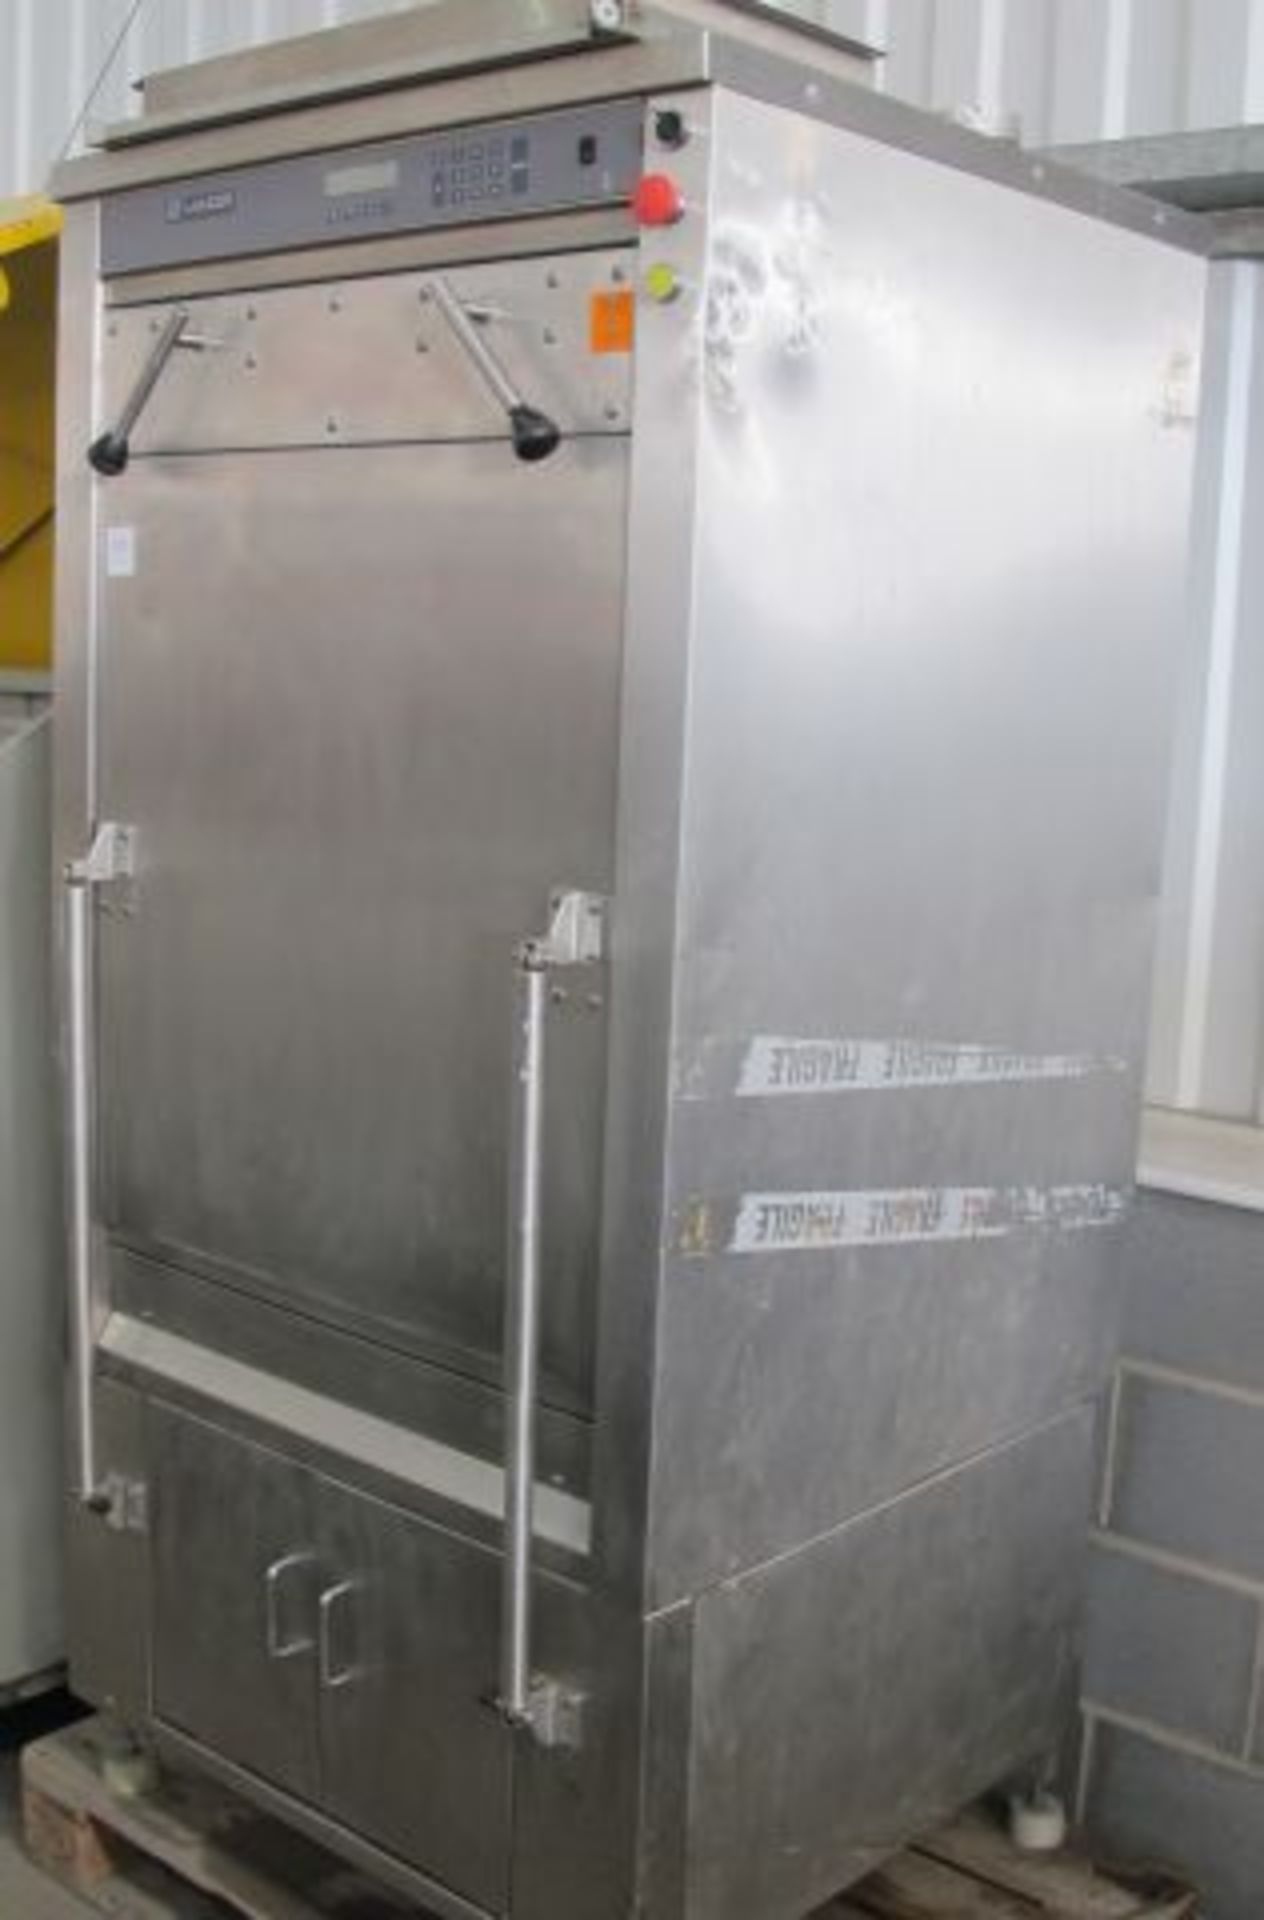 * Getinge Lancer Washer, Model Unknown, as used in Labs and Hospitals. Please note there is a £10